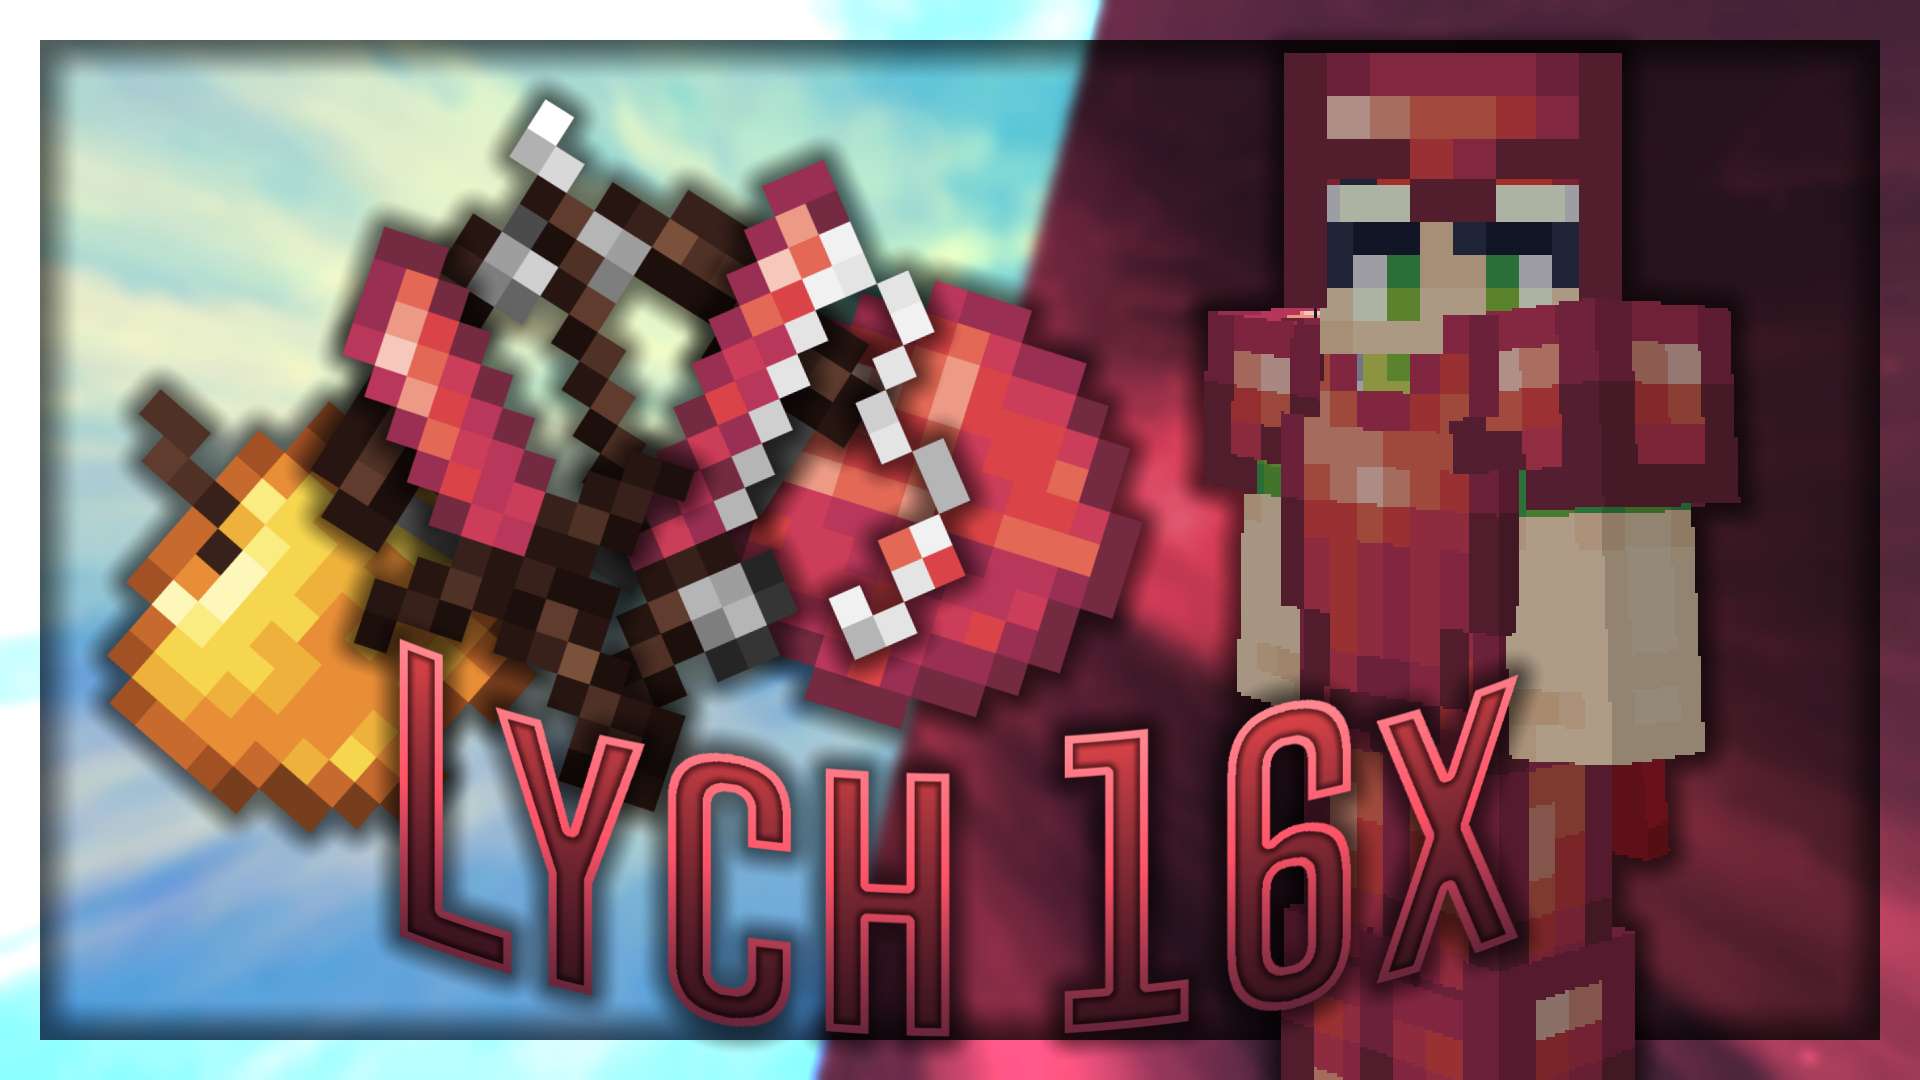 Lych 16 by Mek on PvPRP